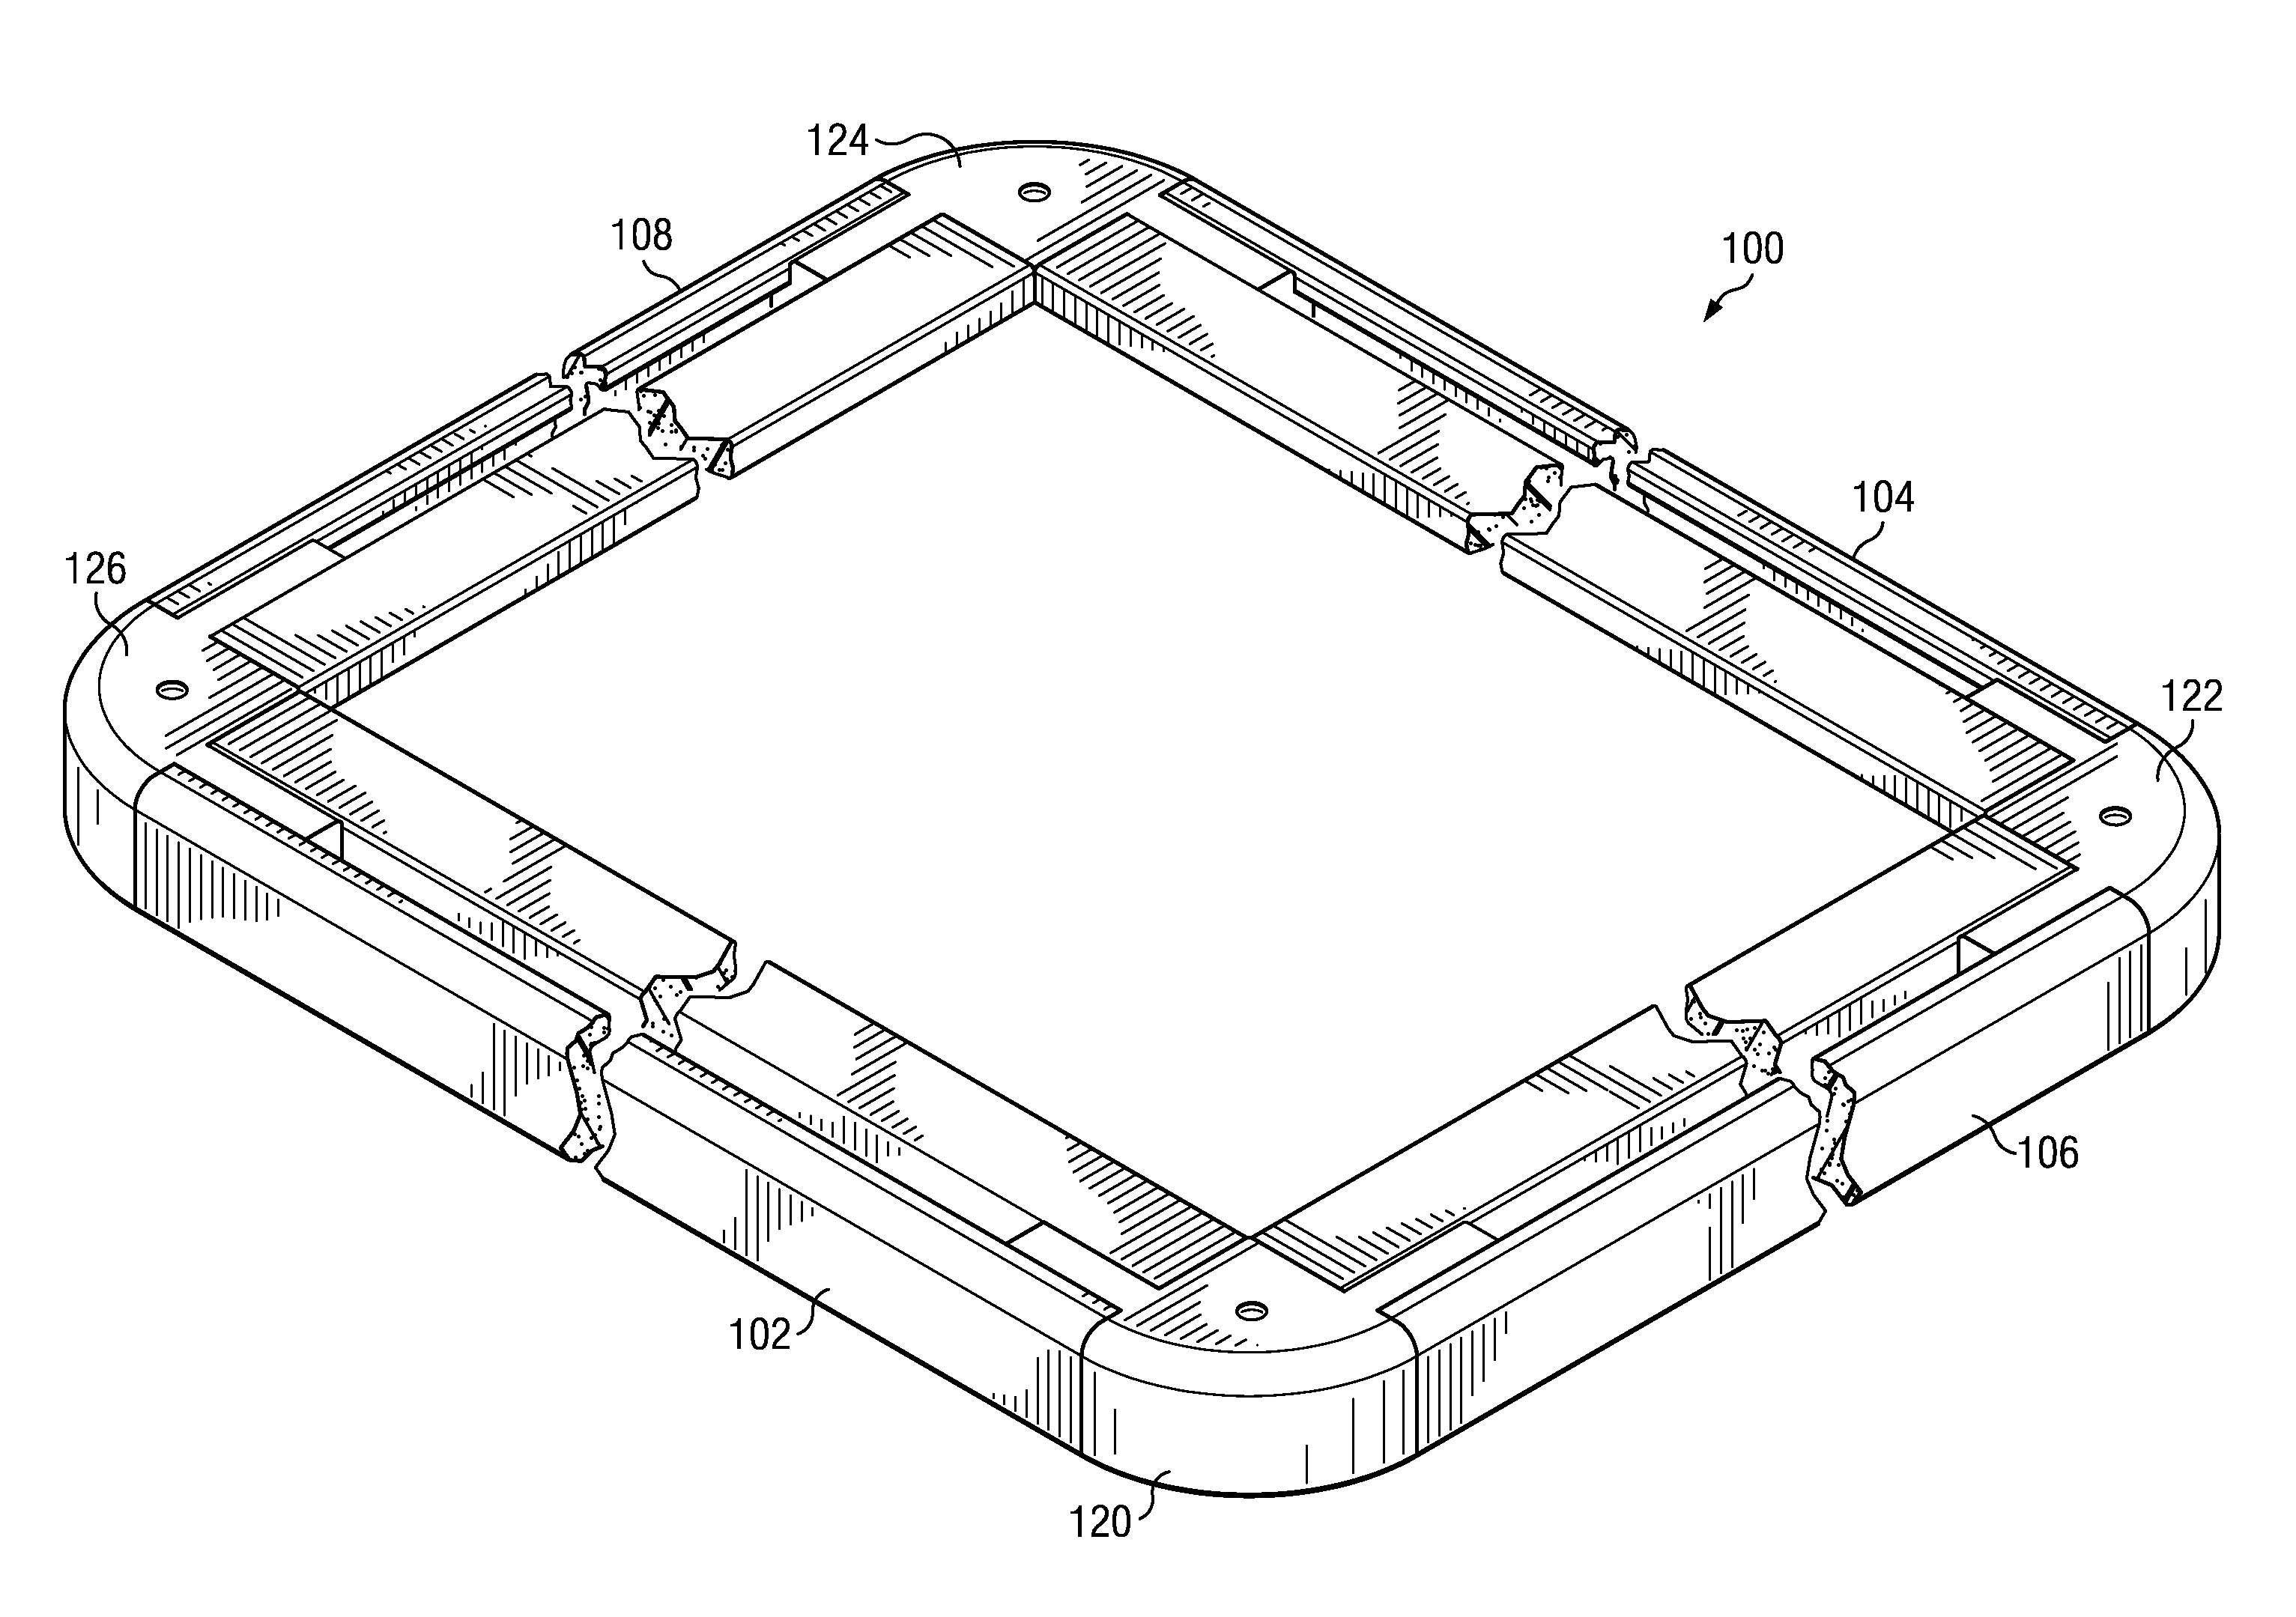 Apparatus and Method of Use for a PVC Composite Mattress Foundation